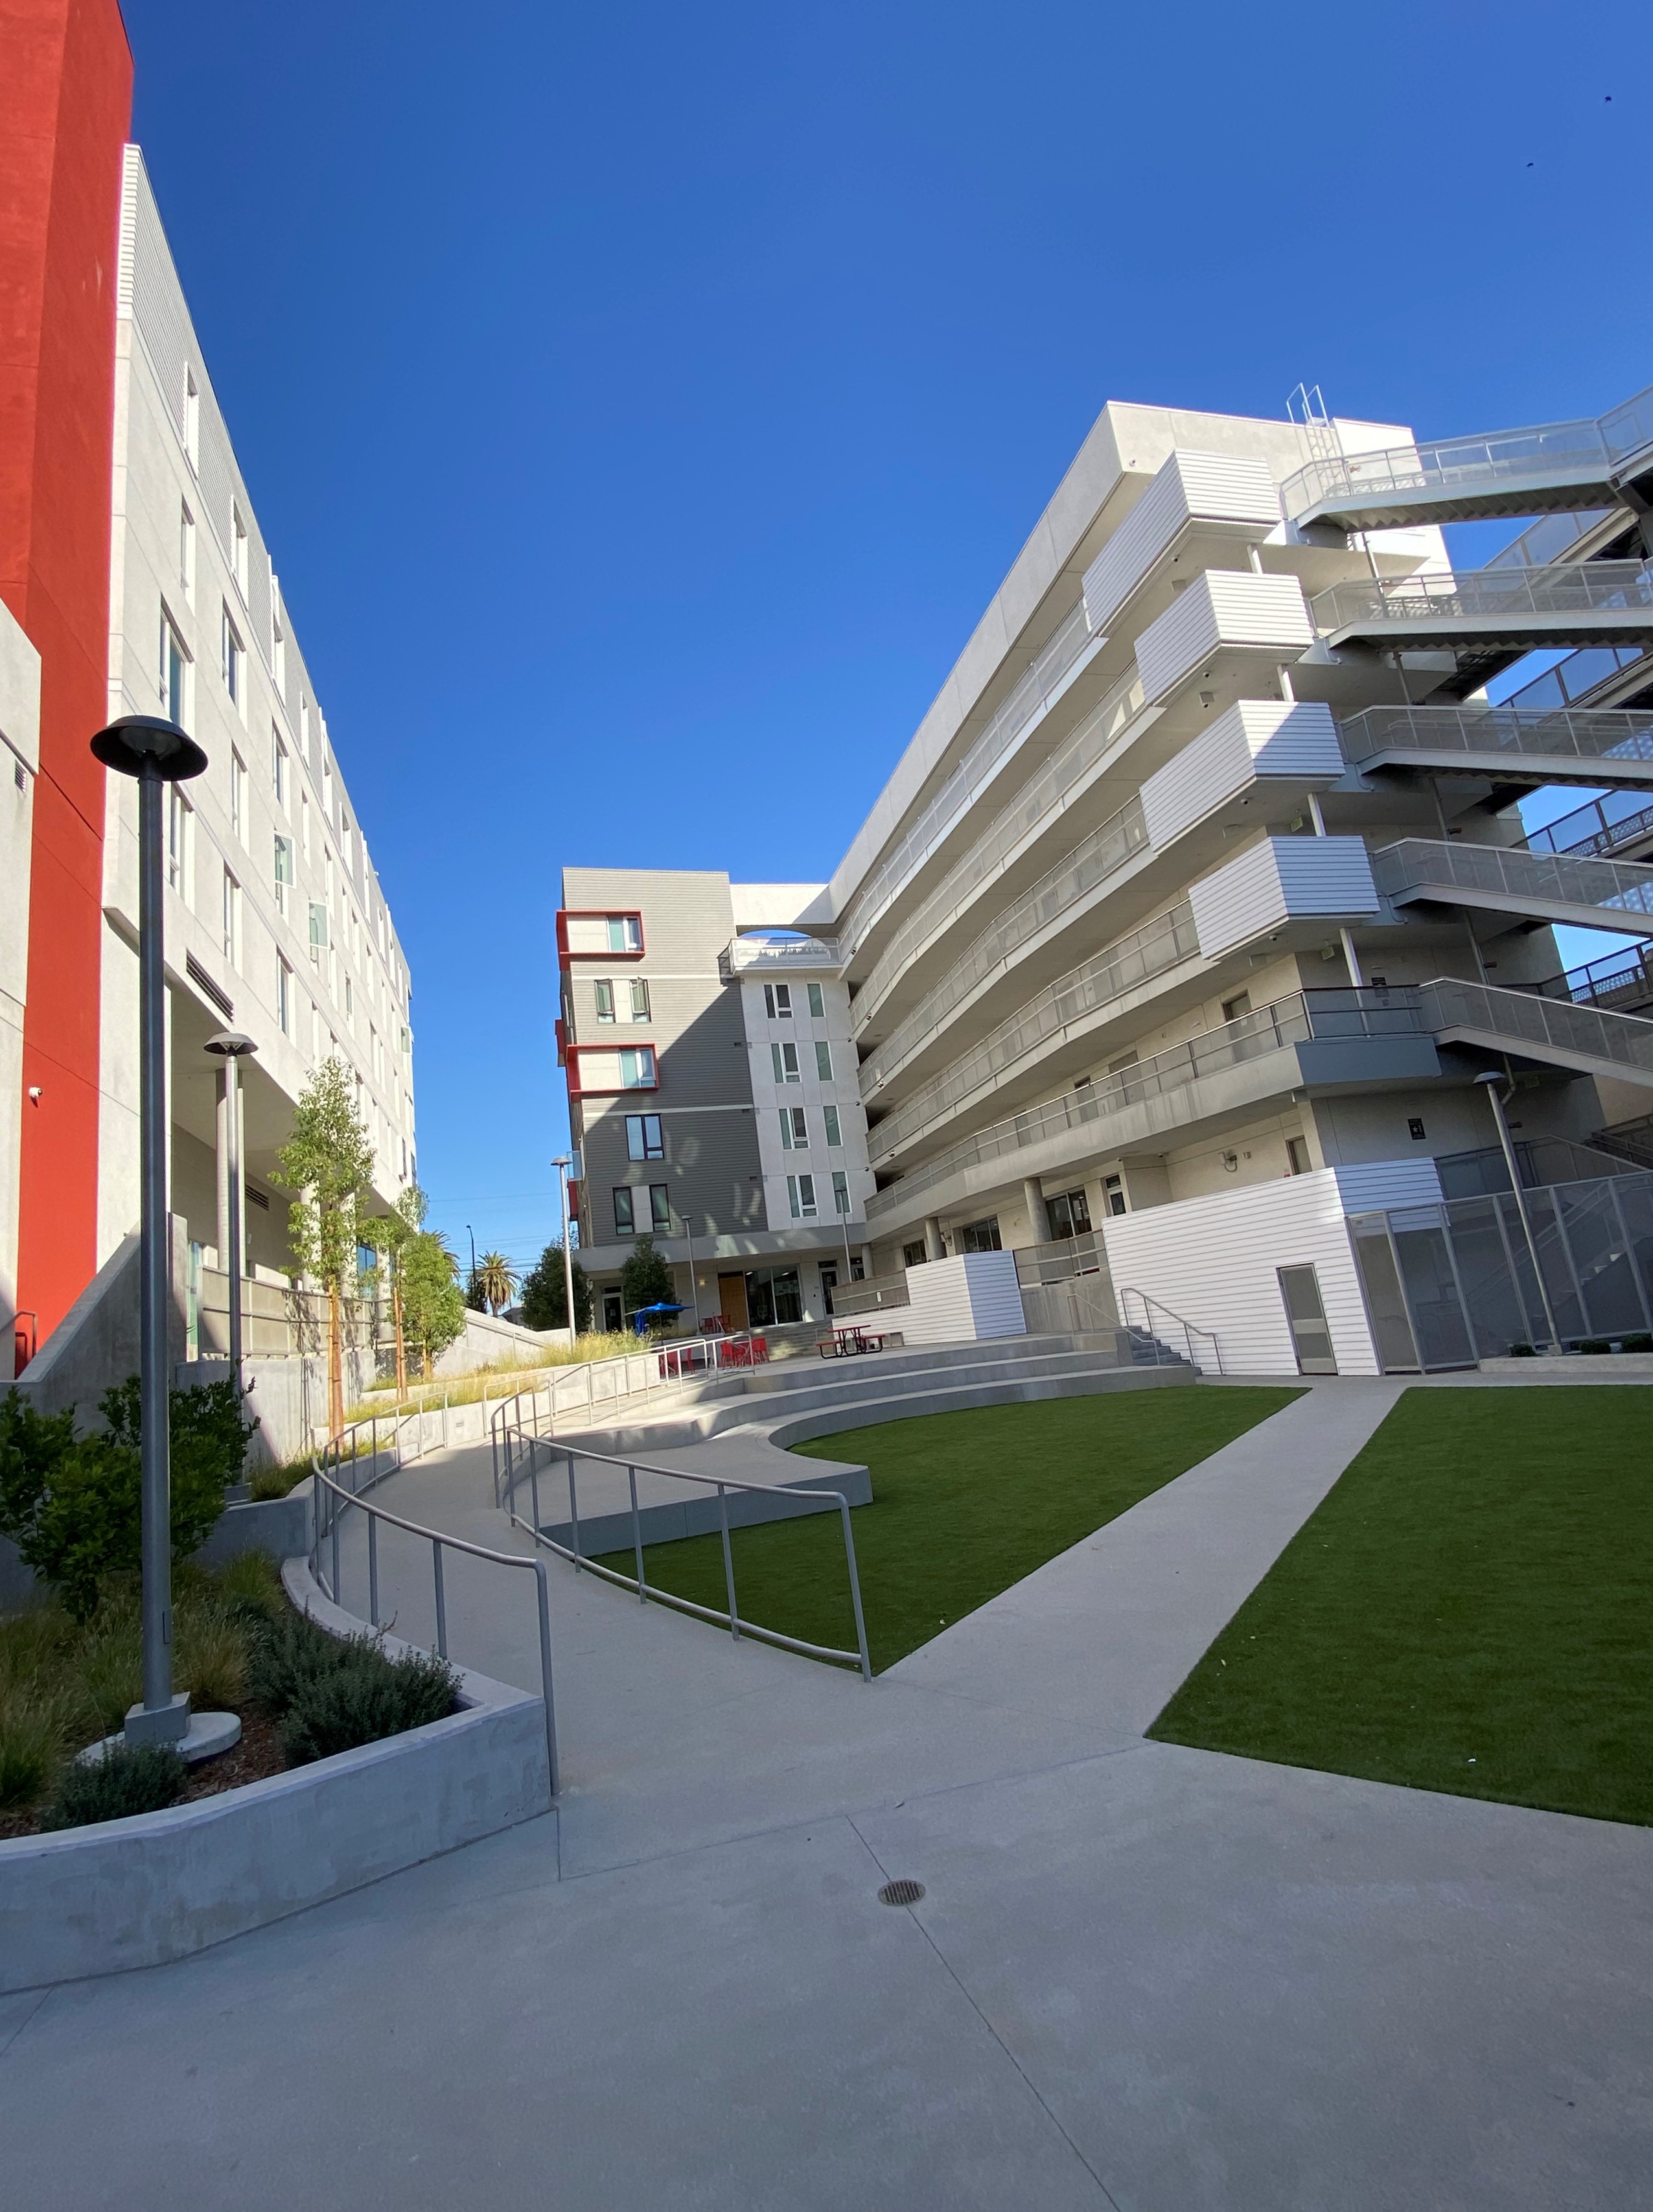 Courtyard with grey multilevel buildings at either side. Grass leading to stairs in the center. A walkway with railing leads to the top of the stairs from the left. Trees in planters line the left building.